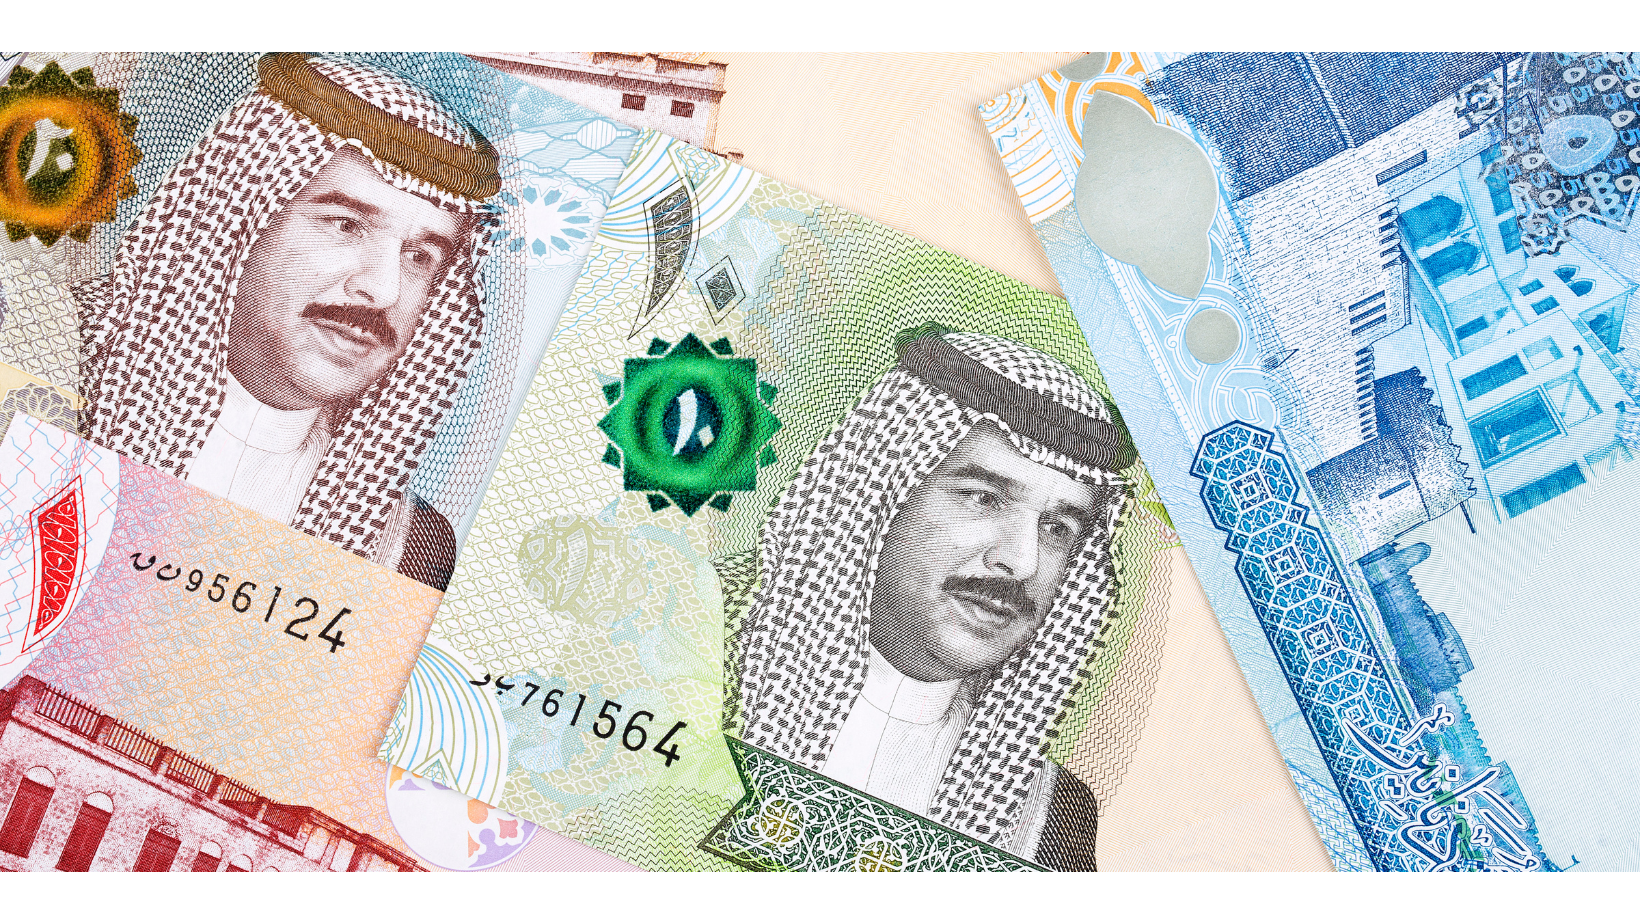 Bahrain salaries, economic growth, local market, salary increase, more money to spend, personal loans, Central Bank of Bahrain, public sector, private sector, pensions, shopping, gadgets, loans, loan installments, monthly installments, happy shopping, more fun, treat yourself, splurge